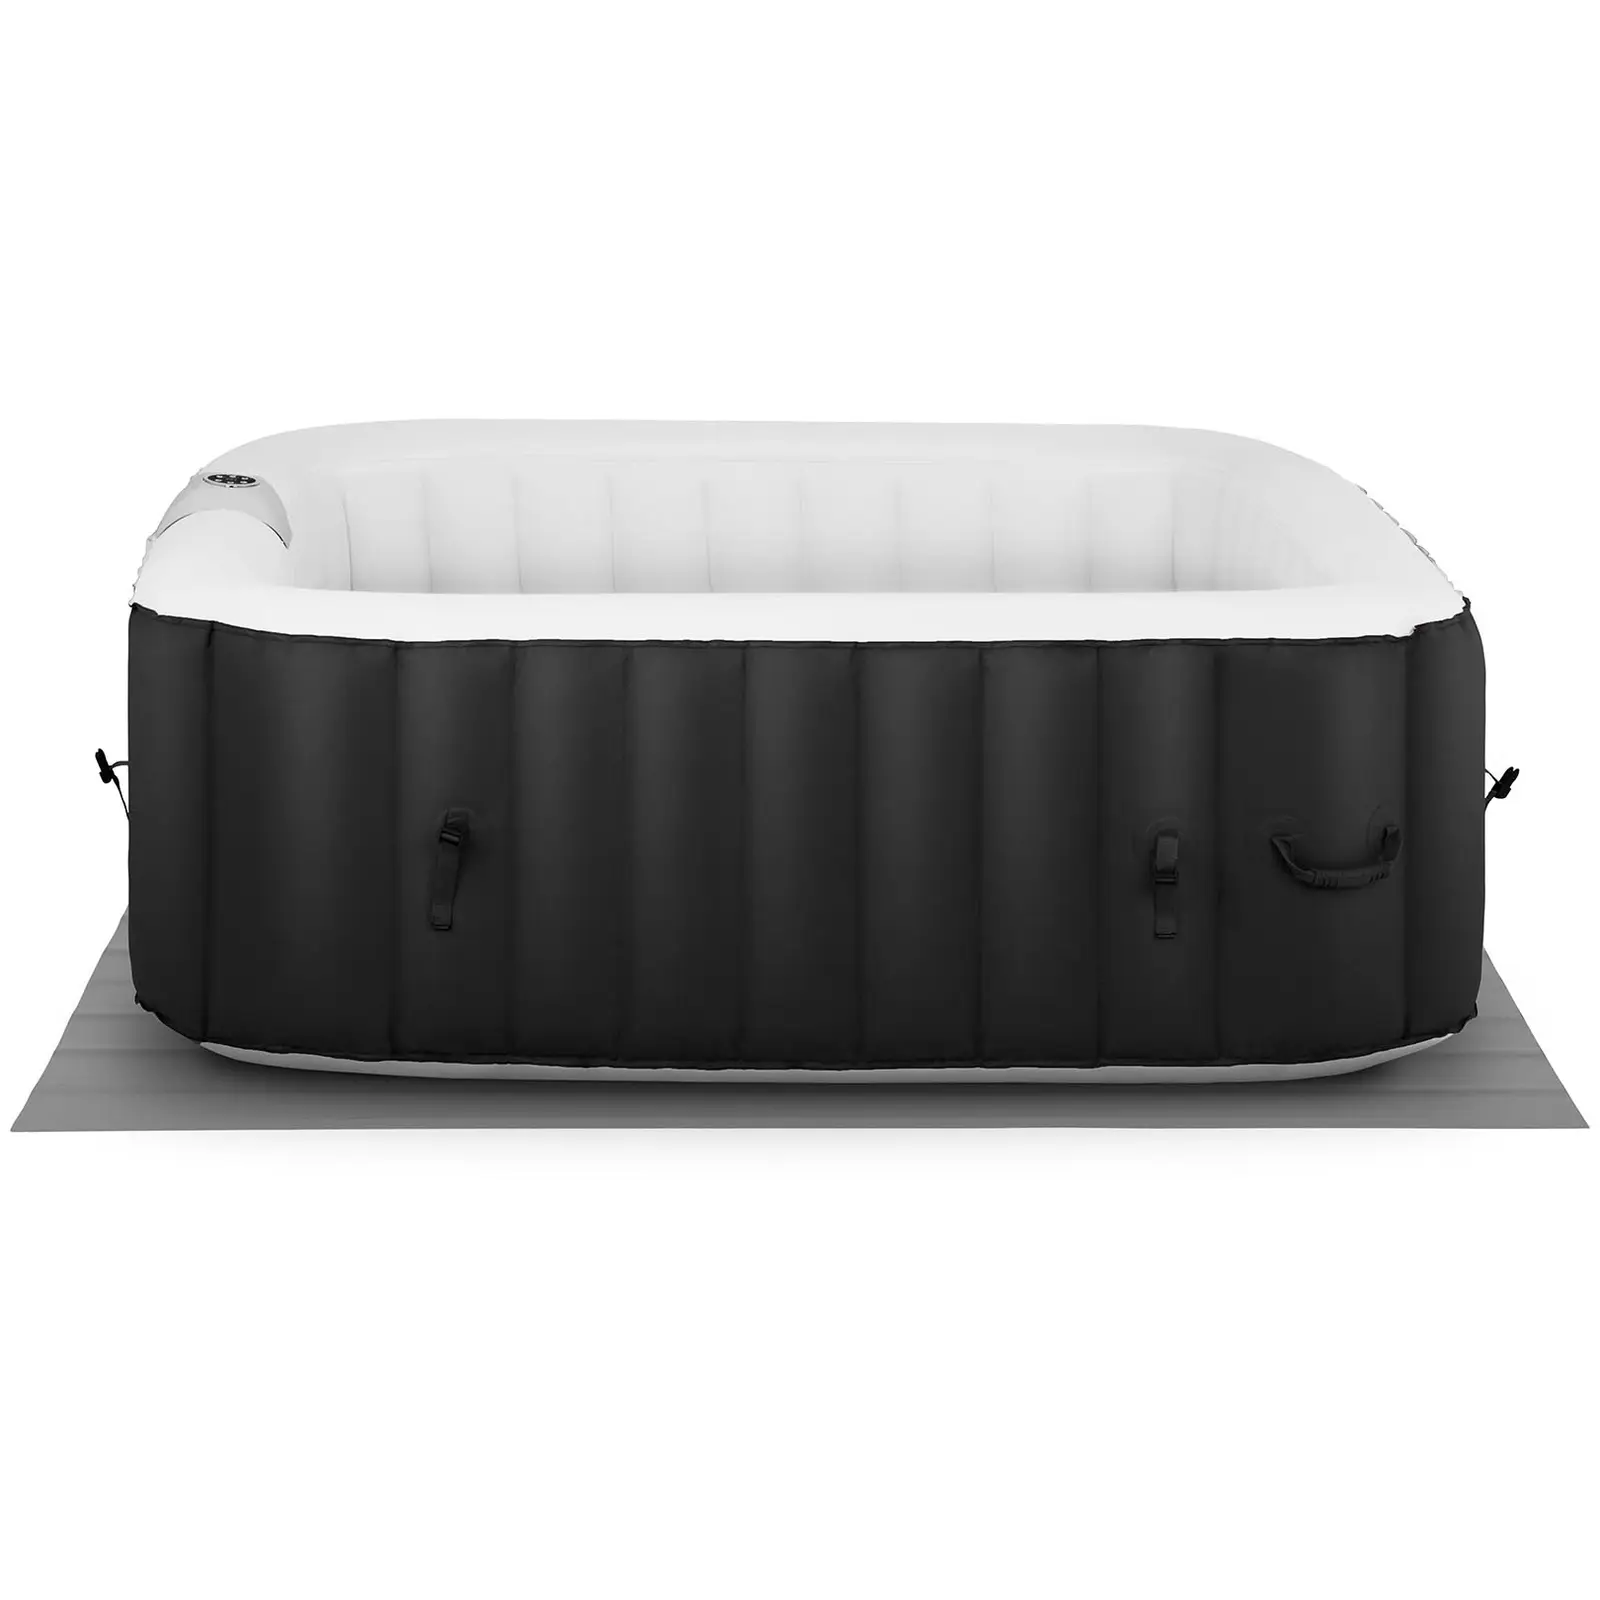 Inflatable Hot Tub - 600 L - 4 people - 100 jets